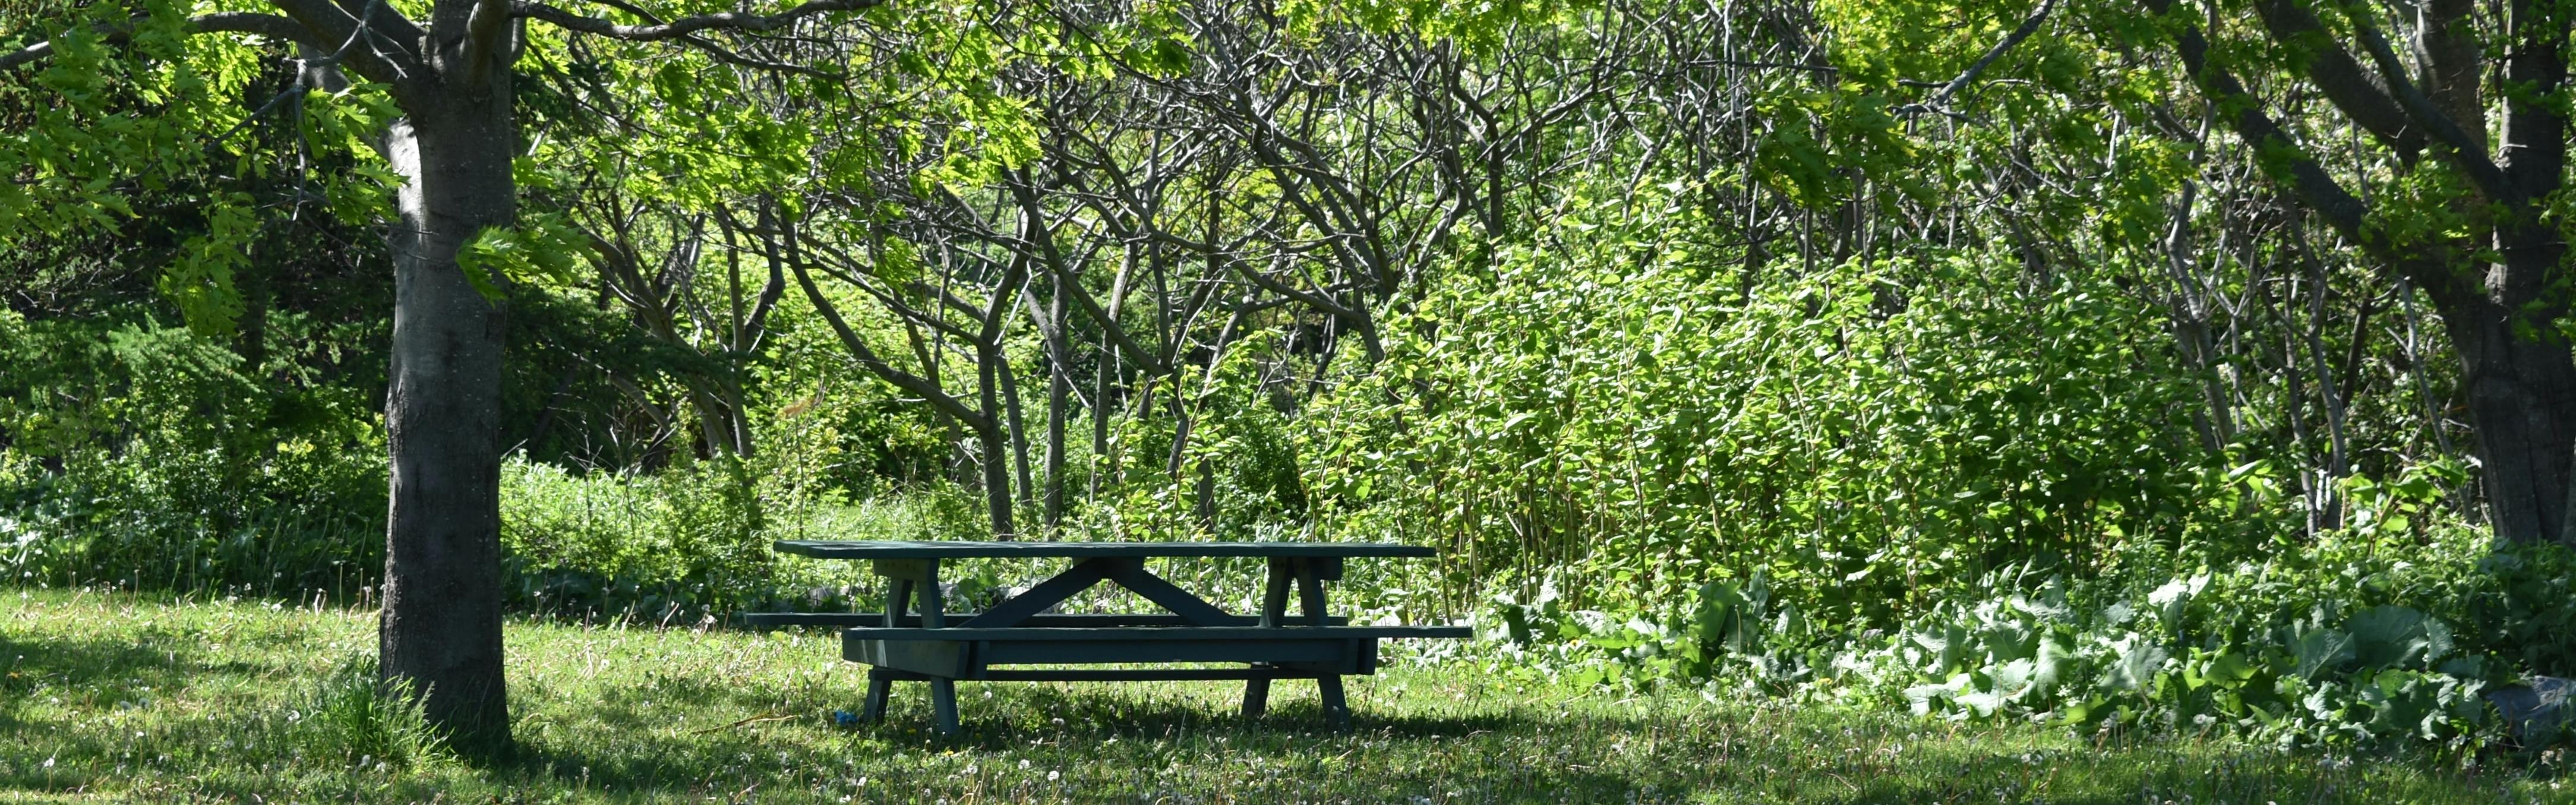 A picnic table sits in a thicket of grass, next to a tree. The entire landscape is lush and green.